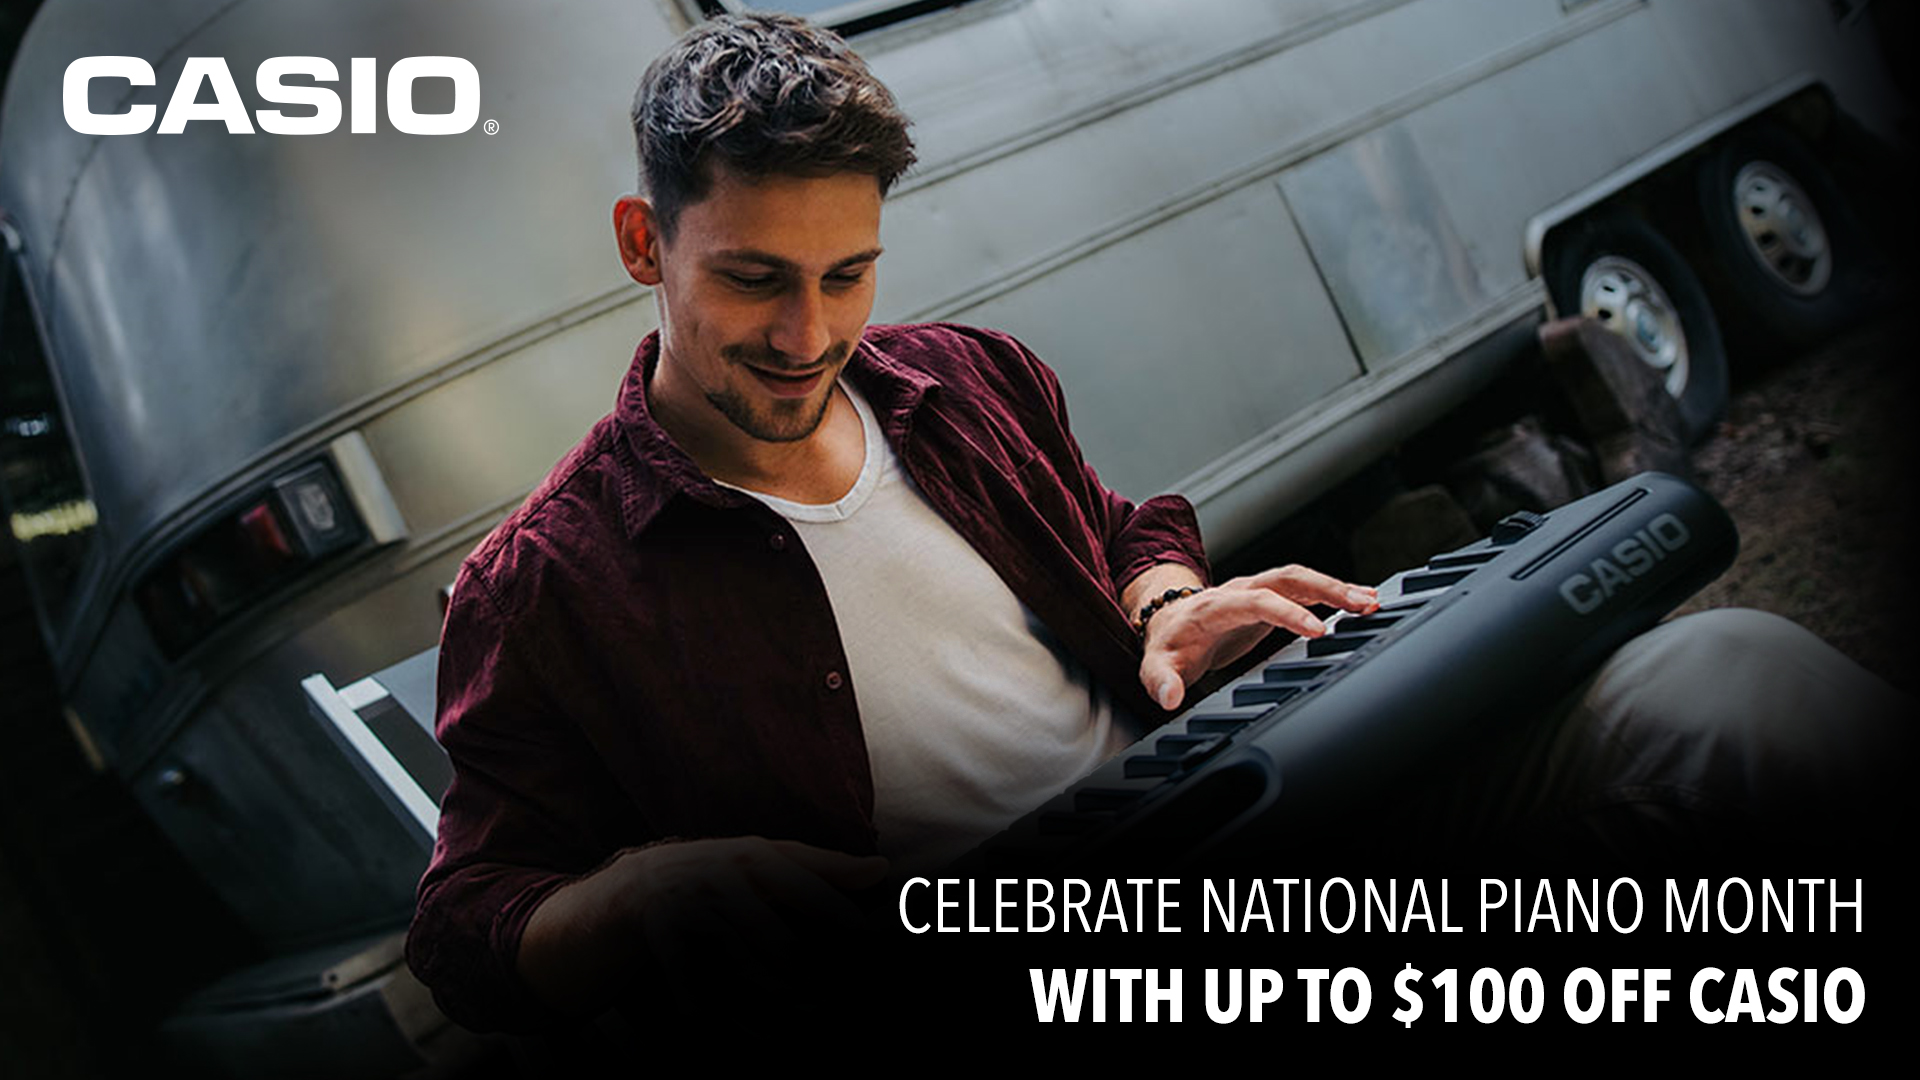 Save Up To $100 on Select Casio Digital Pianos for National Piano Month